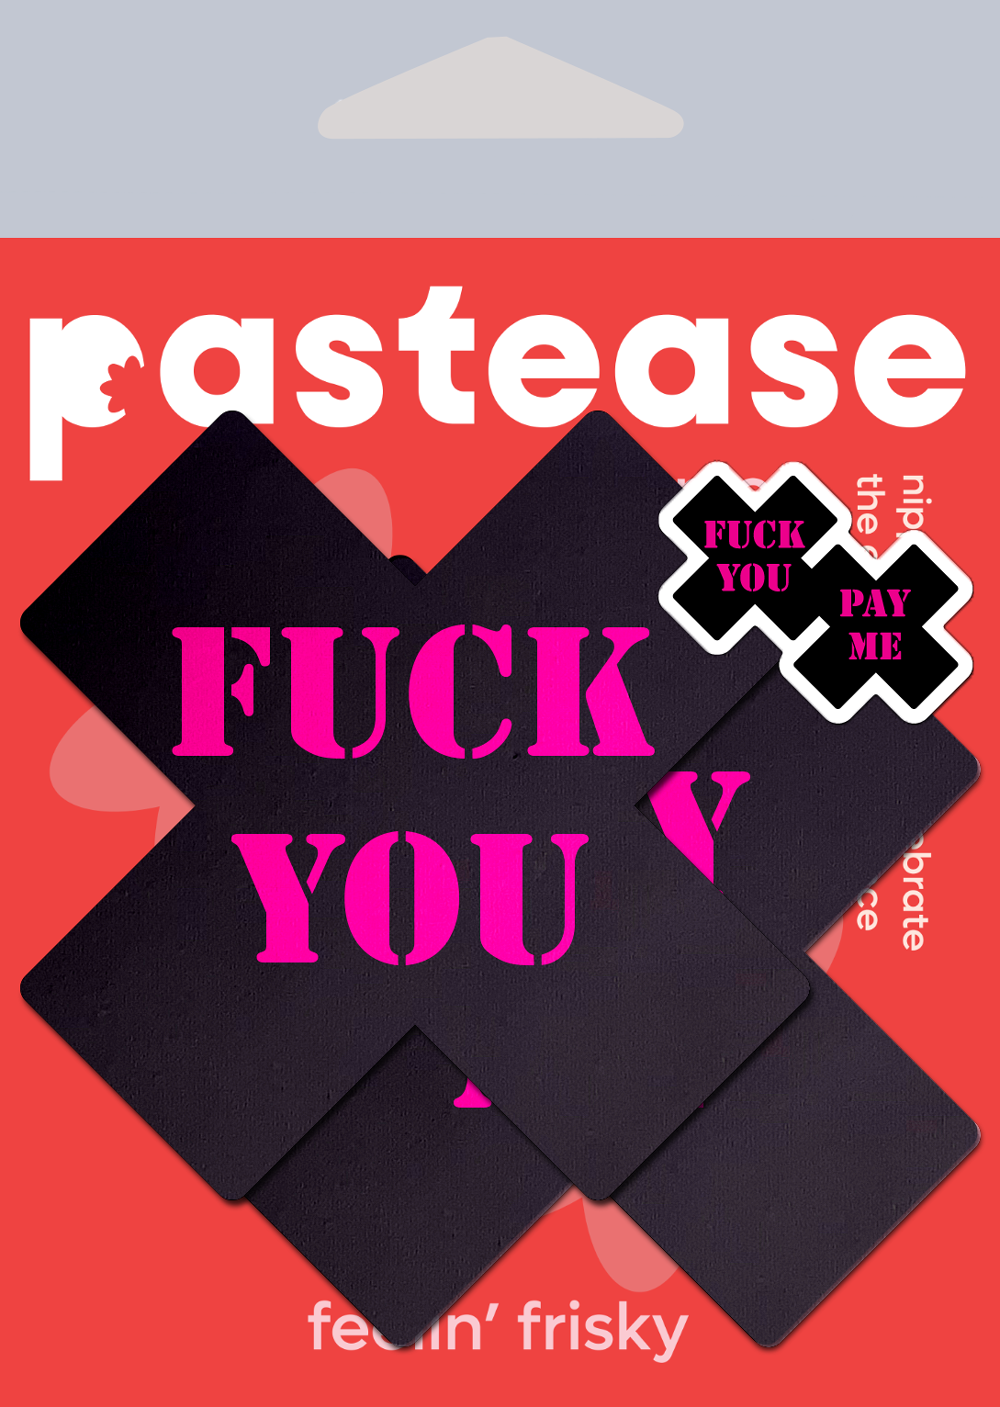 5-Pack: Plus X: Black with Pink 'Fuck You, Pay Me' Cross Nipple Pasties by Pastease®